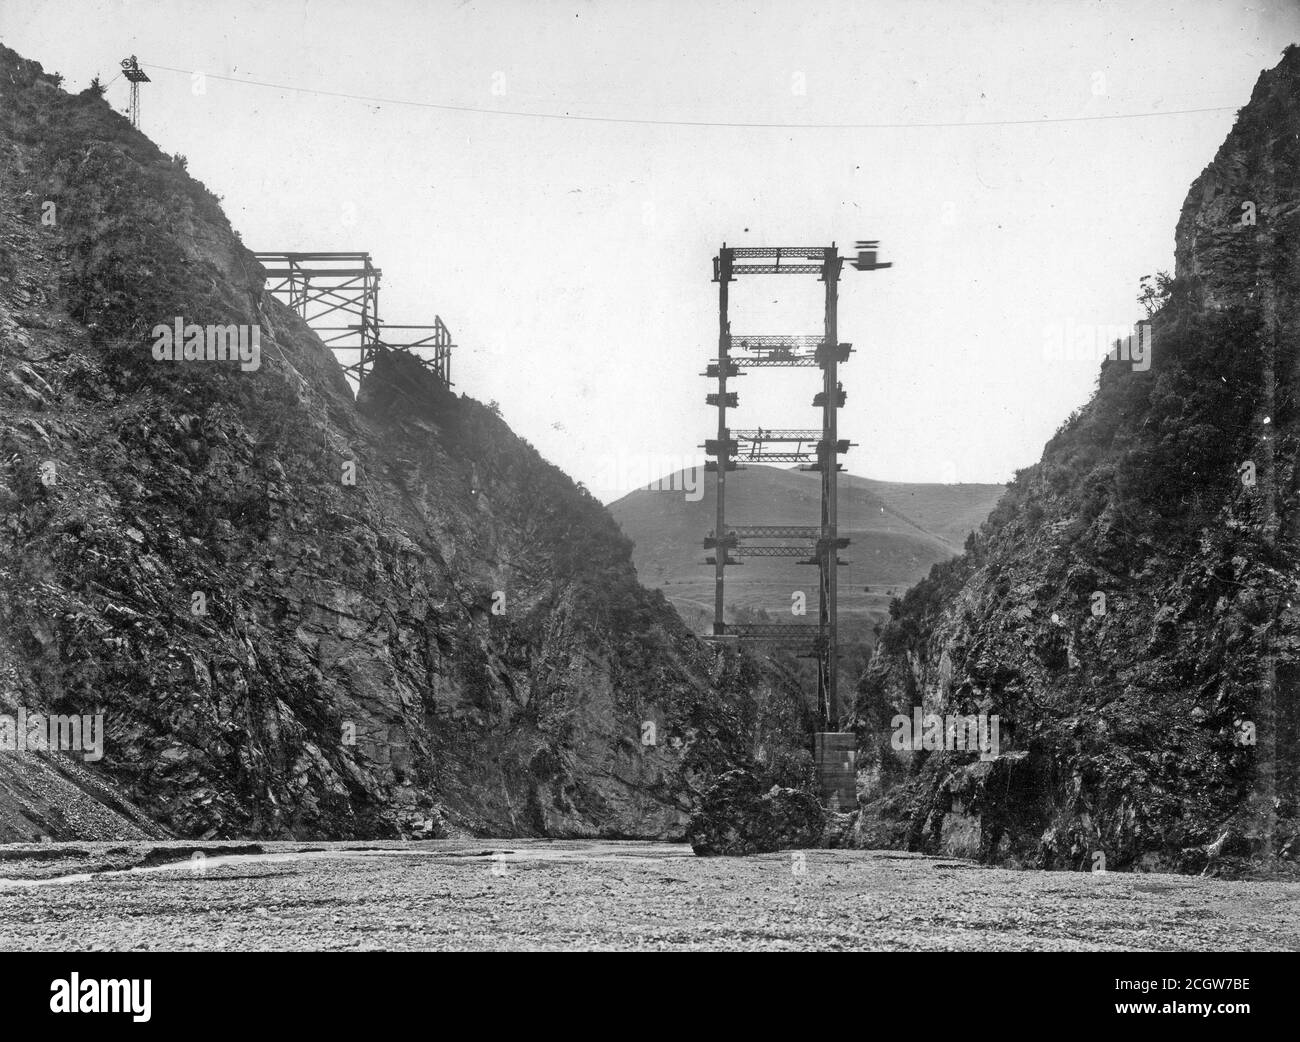 Work continues on the railway viaduct across Staircase Gully on the Midland Line, South Island, New Zealand, in about 1905. The viaduct from point to point is 180 feet across and consists of a 60 foot abutment, two space of 192 feet each and a 36 feet piece. The pier is made of iron 220 feet in height on a strong concrete foundation. From the Logie family collection. Stock Photo